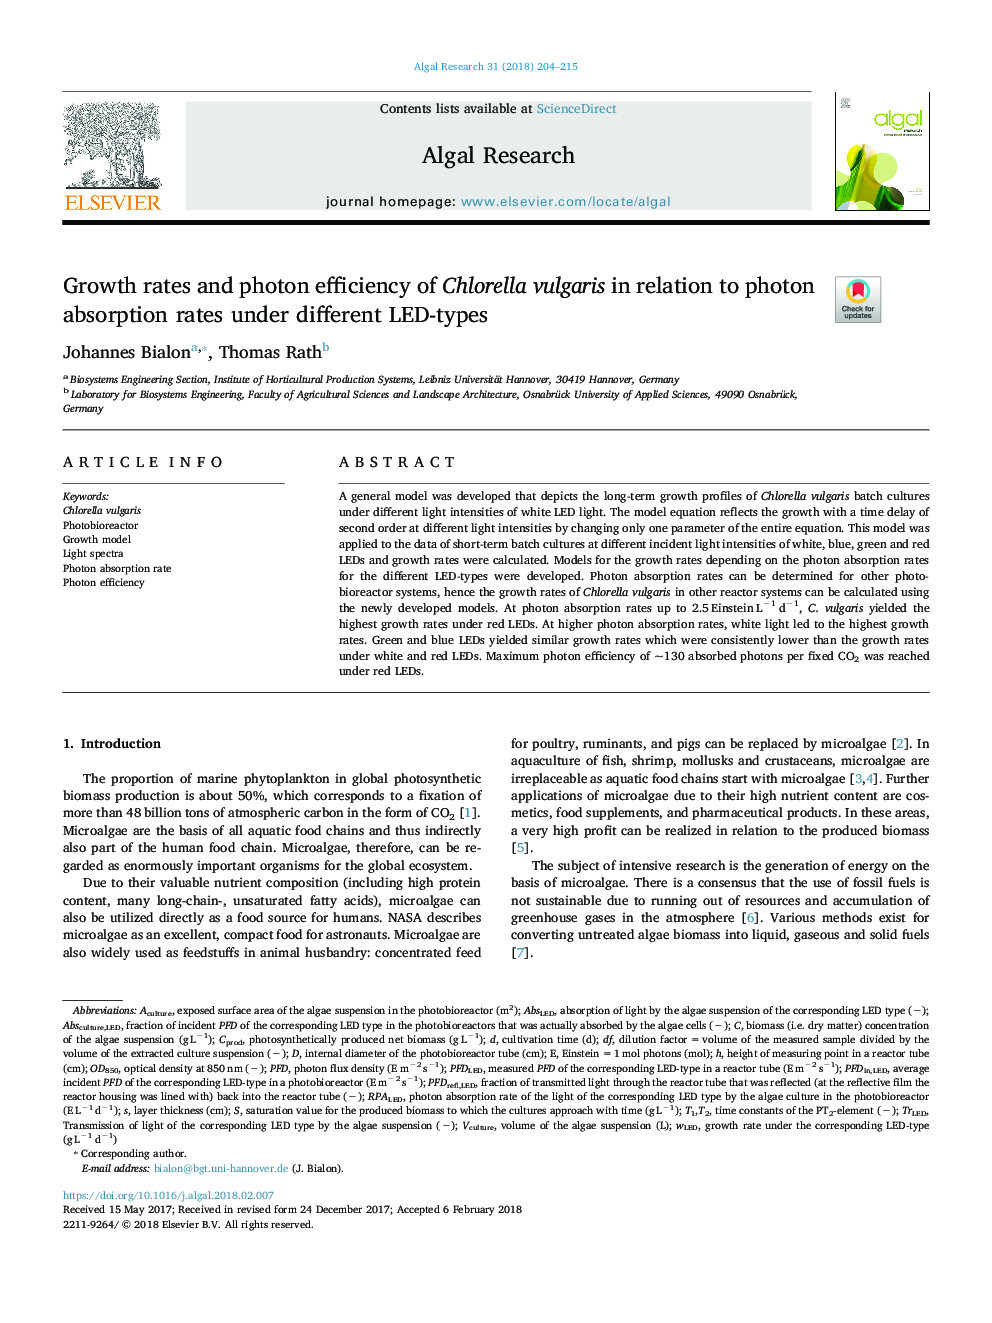 Growth rates and photon efficiency of Chlorella vulgaris in relation to photon absorption rates under different LED-types